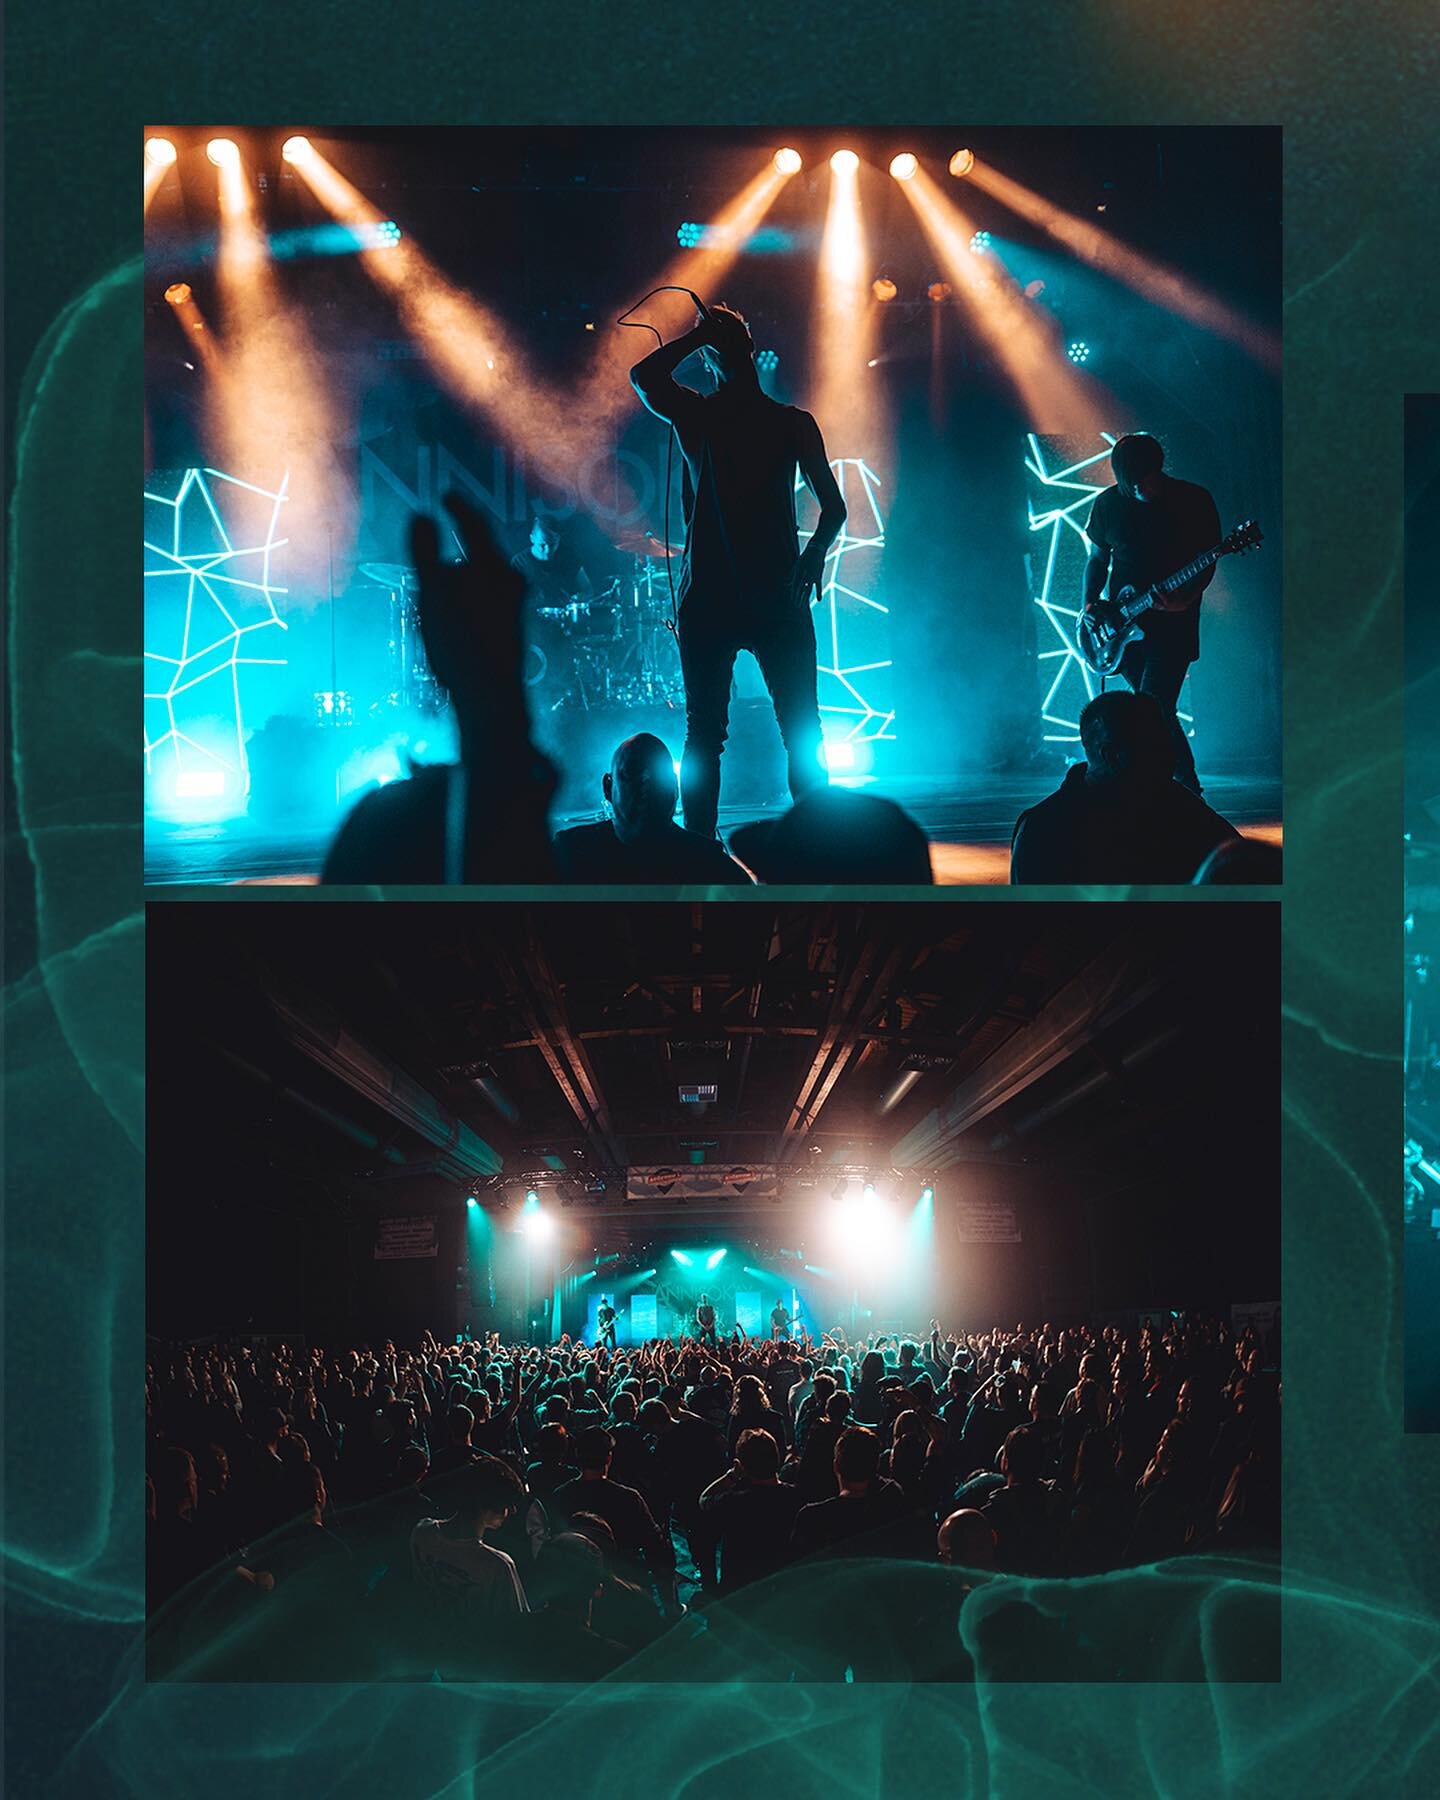 We spent our Easter how we like it most &ndash; on stage! 🤘😈 Thanks @eastercross.festival for having us and thank you all for this lovely time! 💙

Photos by @&zwnj;lukesmediacorner

#metalcore #metalmusic #eastercross #festival #live #band #anniso